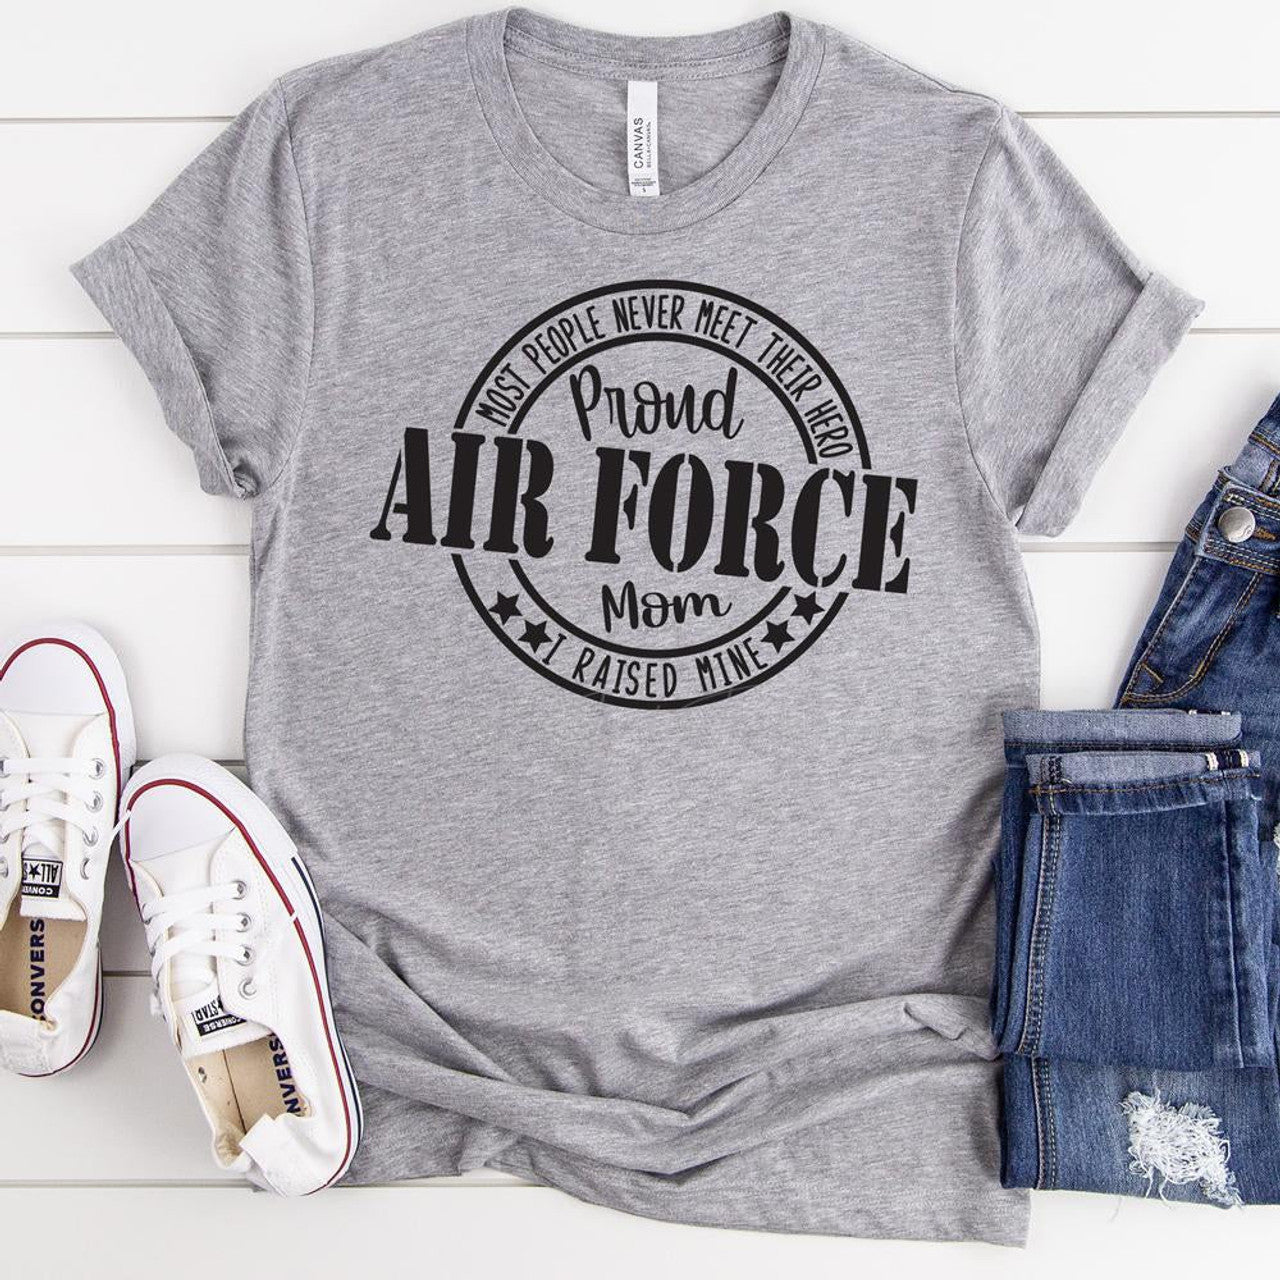 Proud Air Force Mom